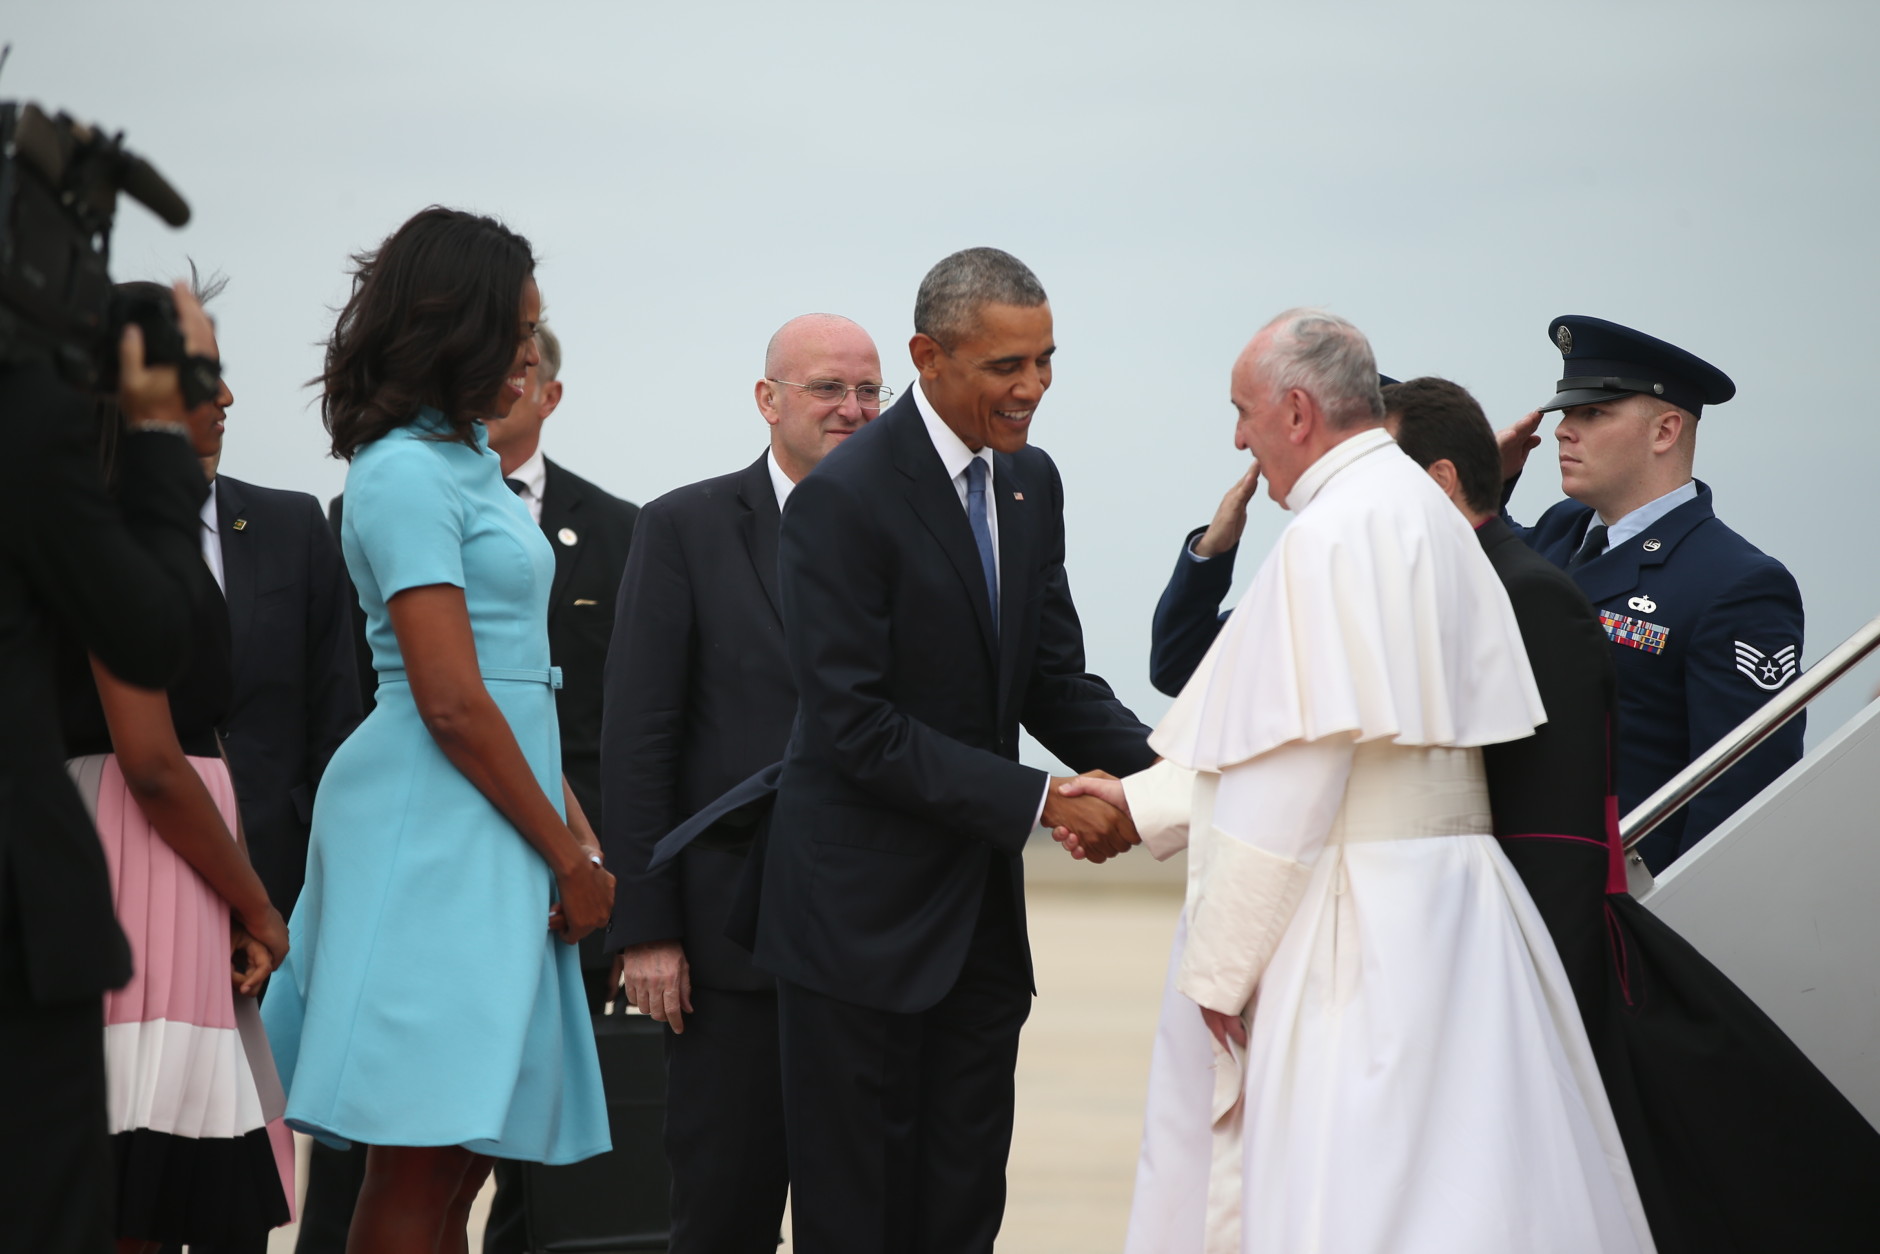 President Barack Obama and first lady Michelle Obama greet Pope Francis upon his arrival at Andrews Air Force Base, Md., Tuesday, Sept. 22, 2015. (AP Photo/Andrew Harnik)